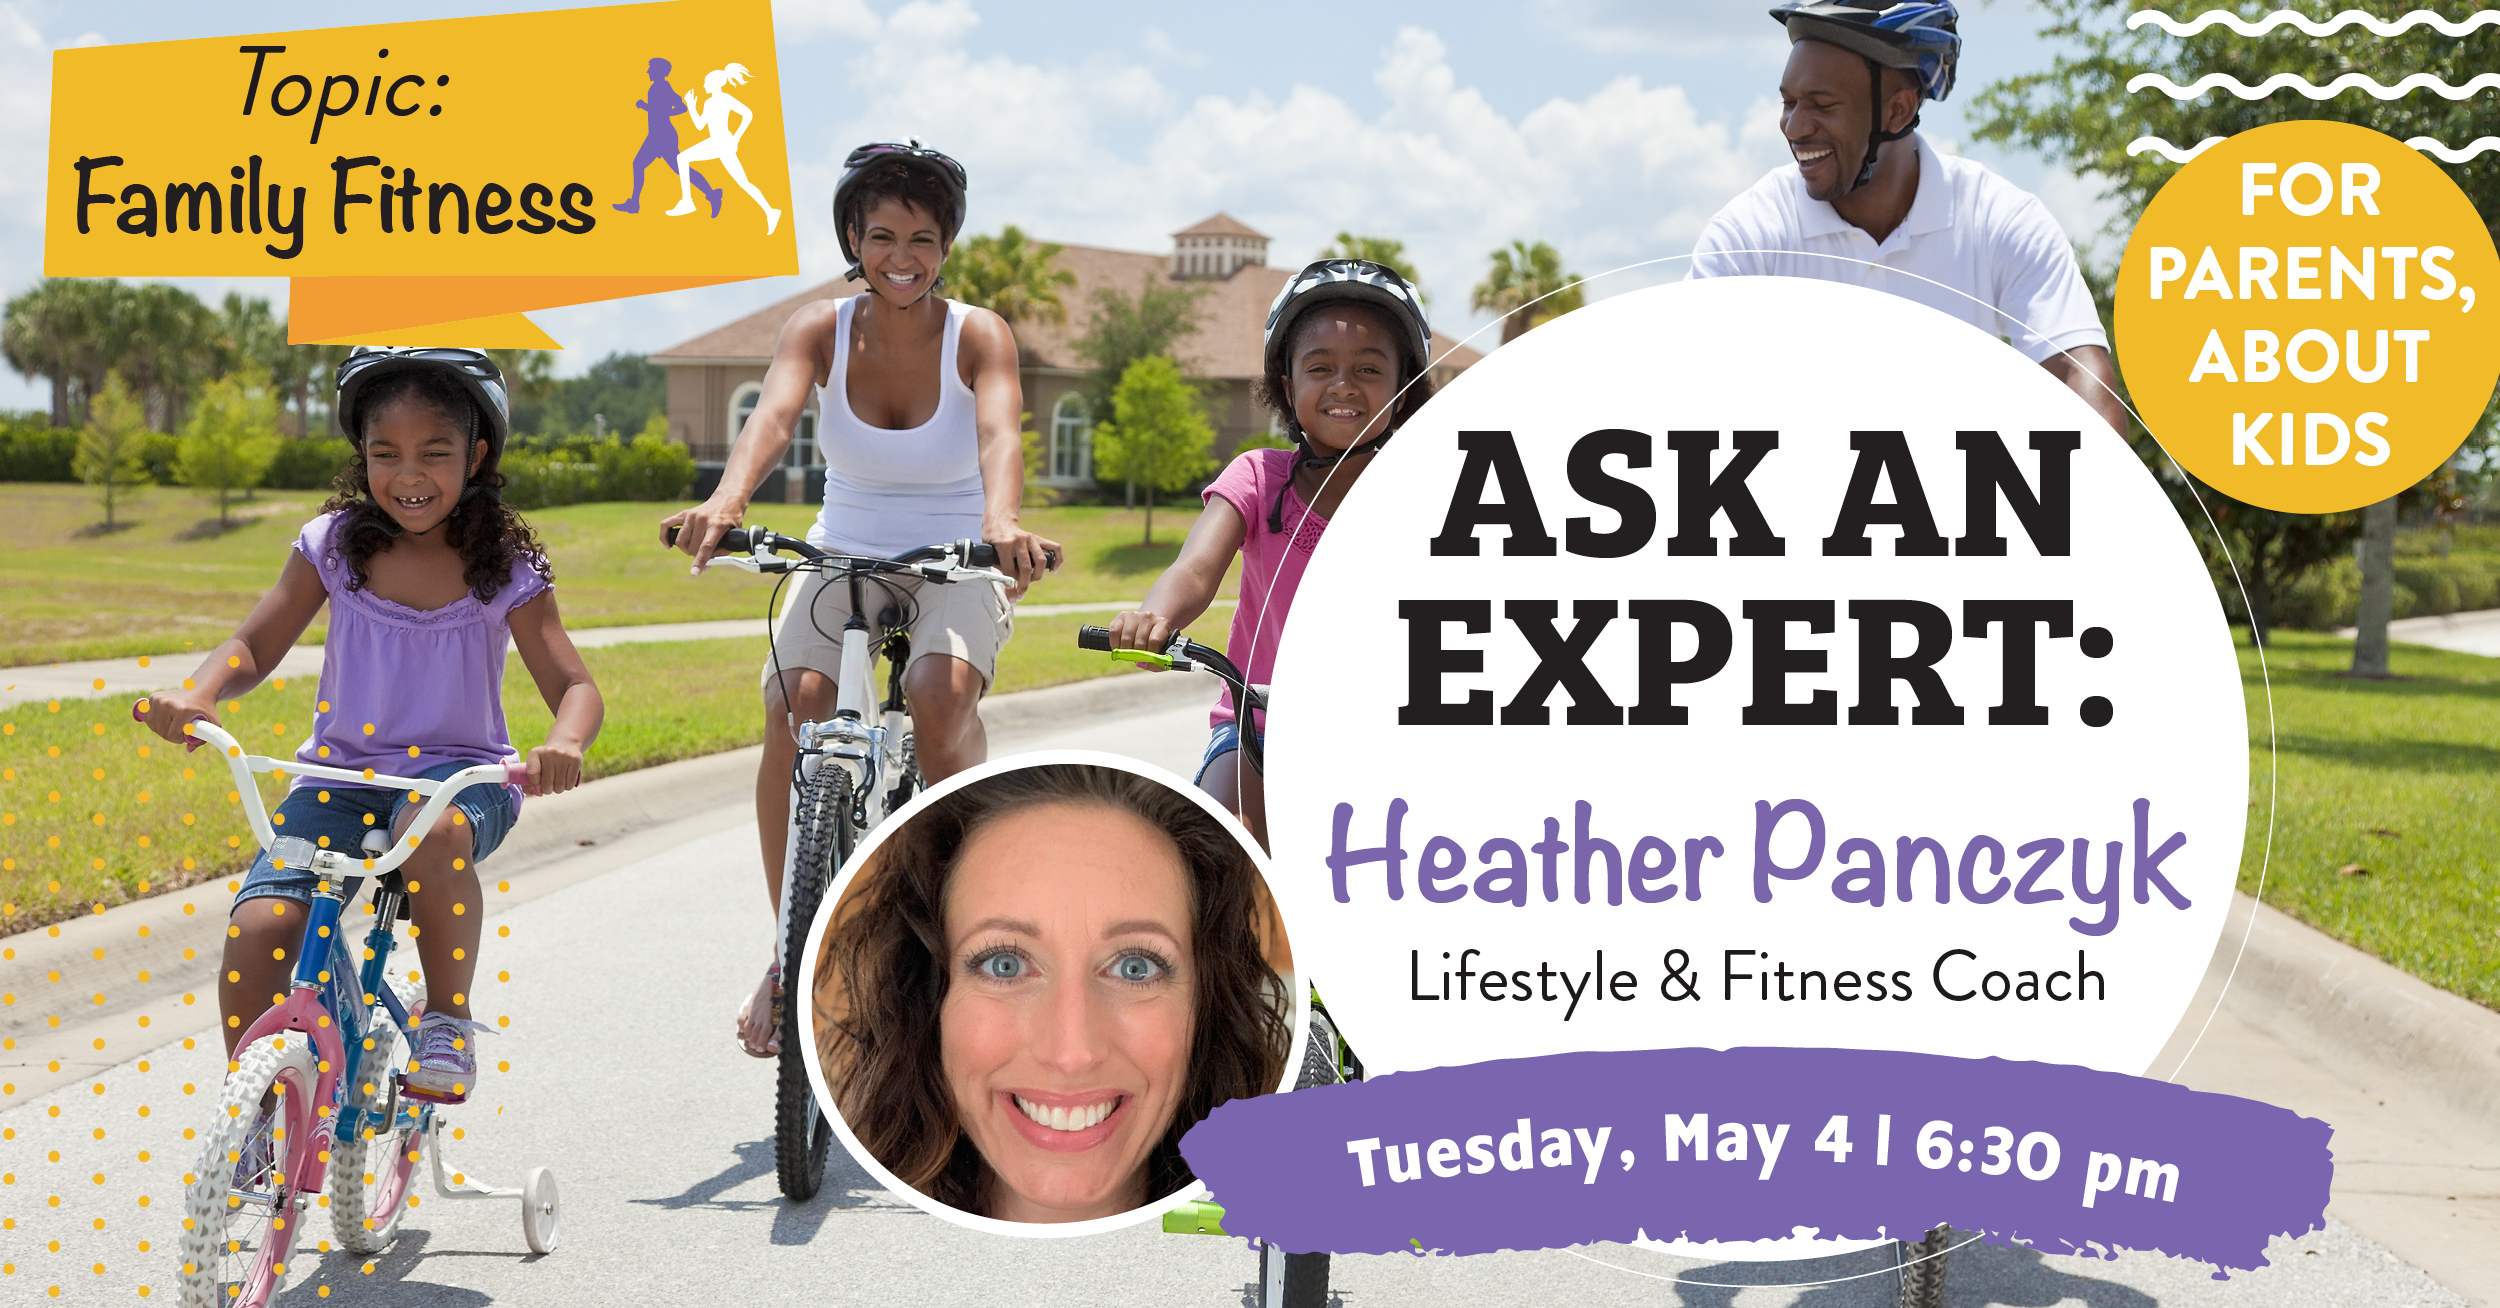 Ask an Expert: Family Fitness. Heather Panczyk Lifestyle & Fitness Coach. For Parents, About Kids Tuesday, May 4 at 6:30pm